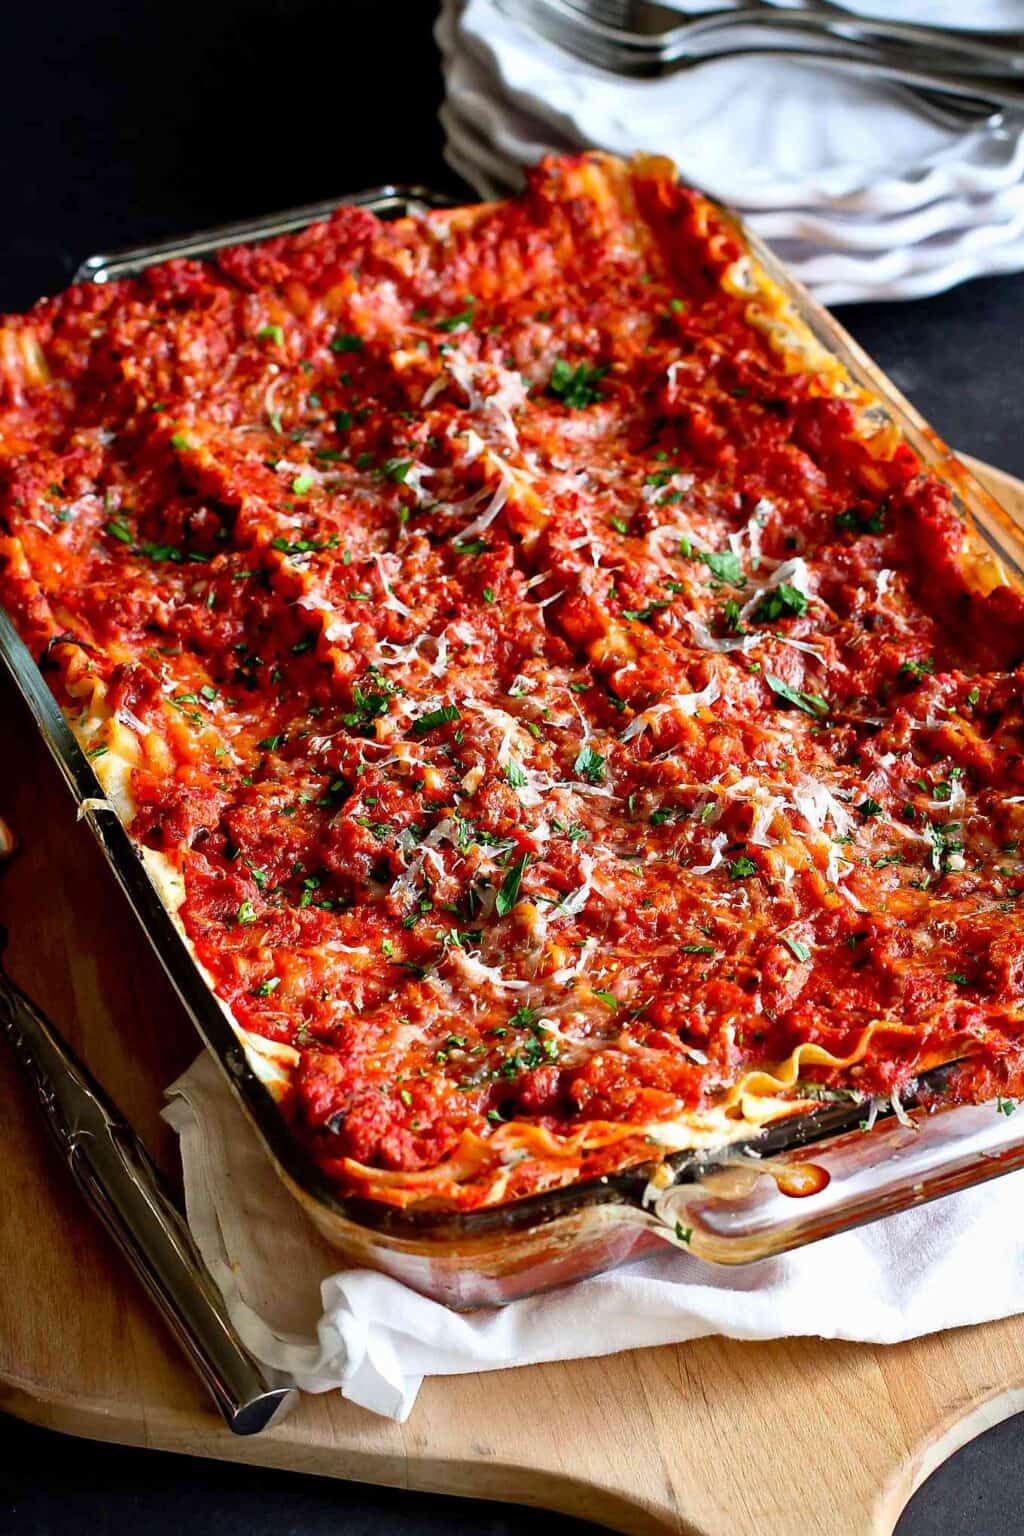 This ground turkey lasagna recipe is great for feeding a crowd! Pair it with a salad for a meal that everyone will love. 326 calories and 6 Weight Watchers SP | Recipes | Lasagne | Healthy | For A Crowd | No Ricotta | Easy | Best #turkeylasagna #lasagnarecipes #foracrowd #smartpoints #pastarecipes #entertaining